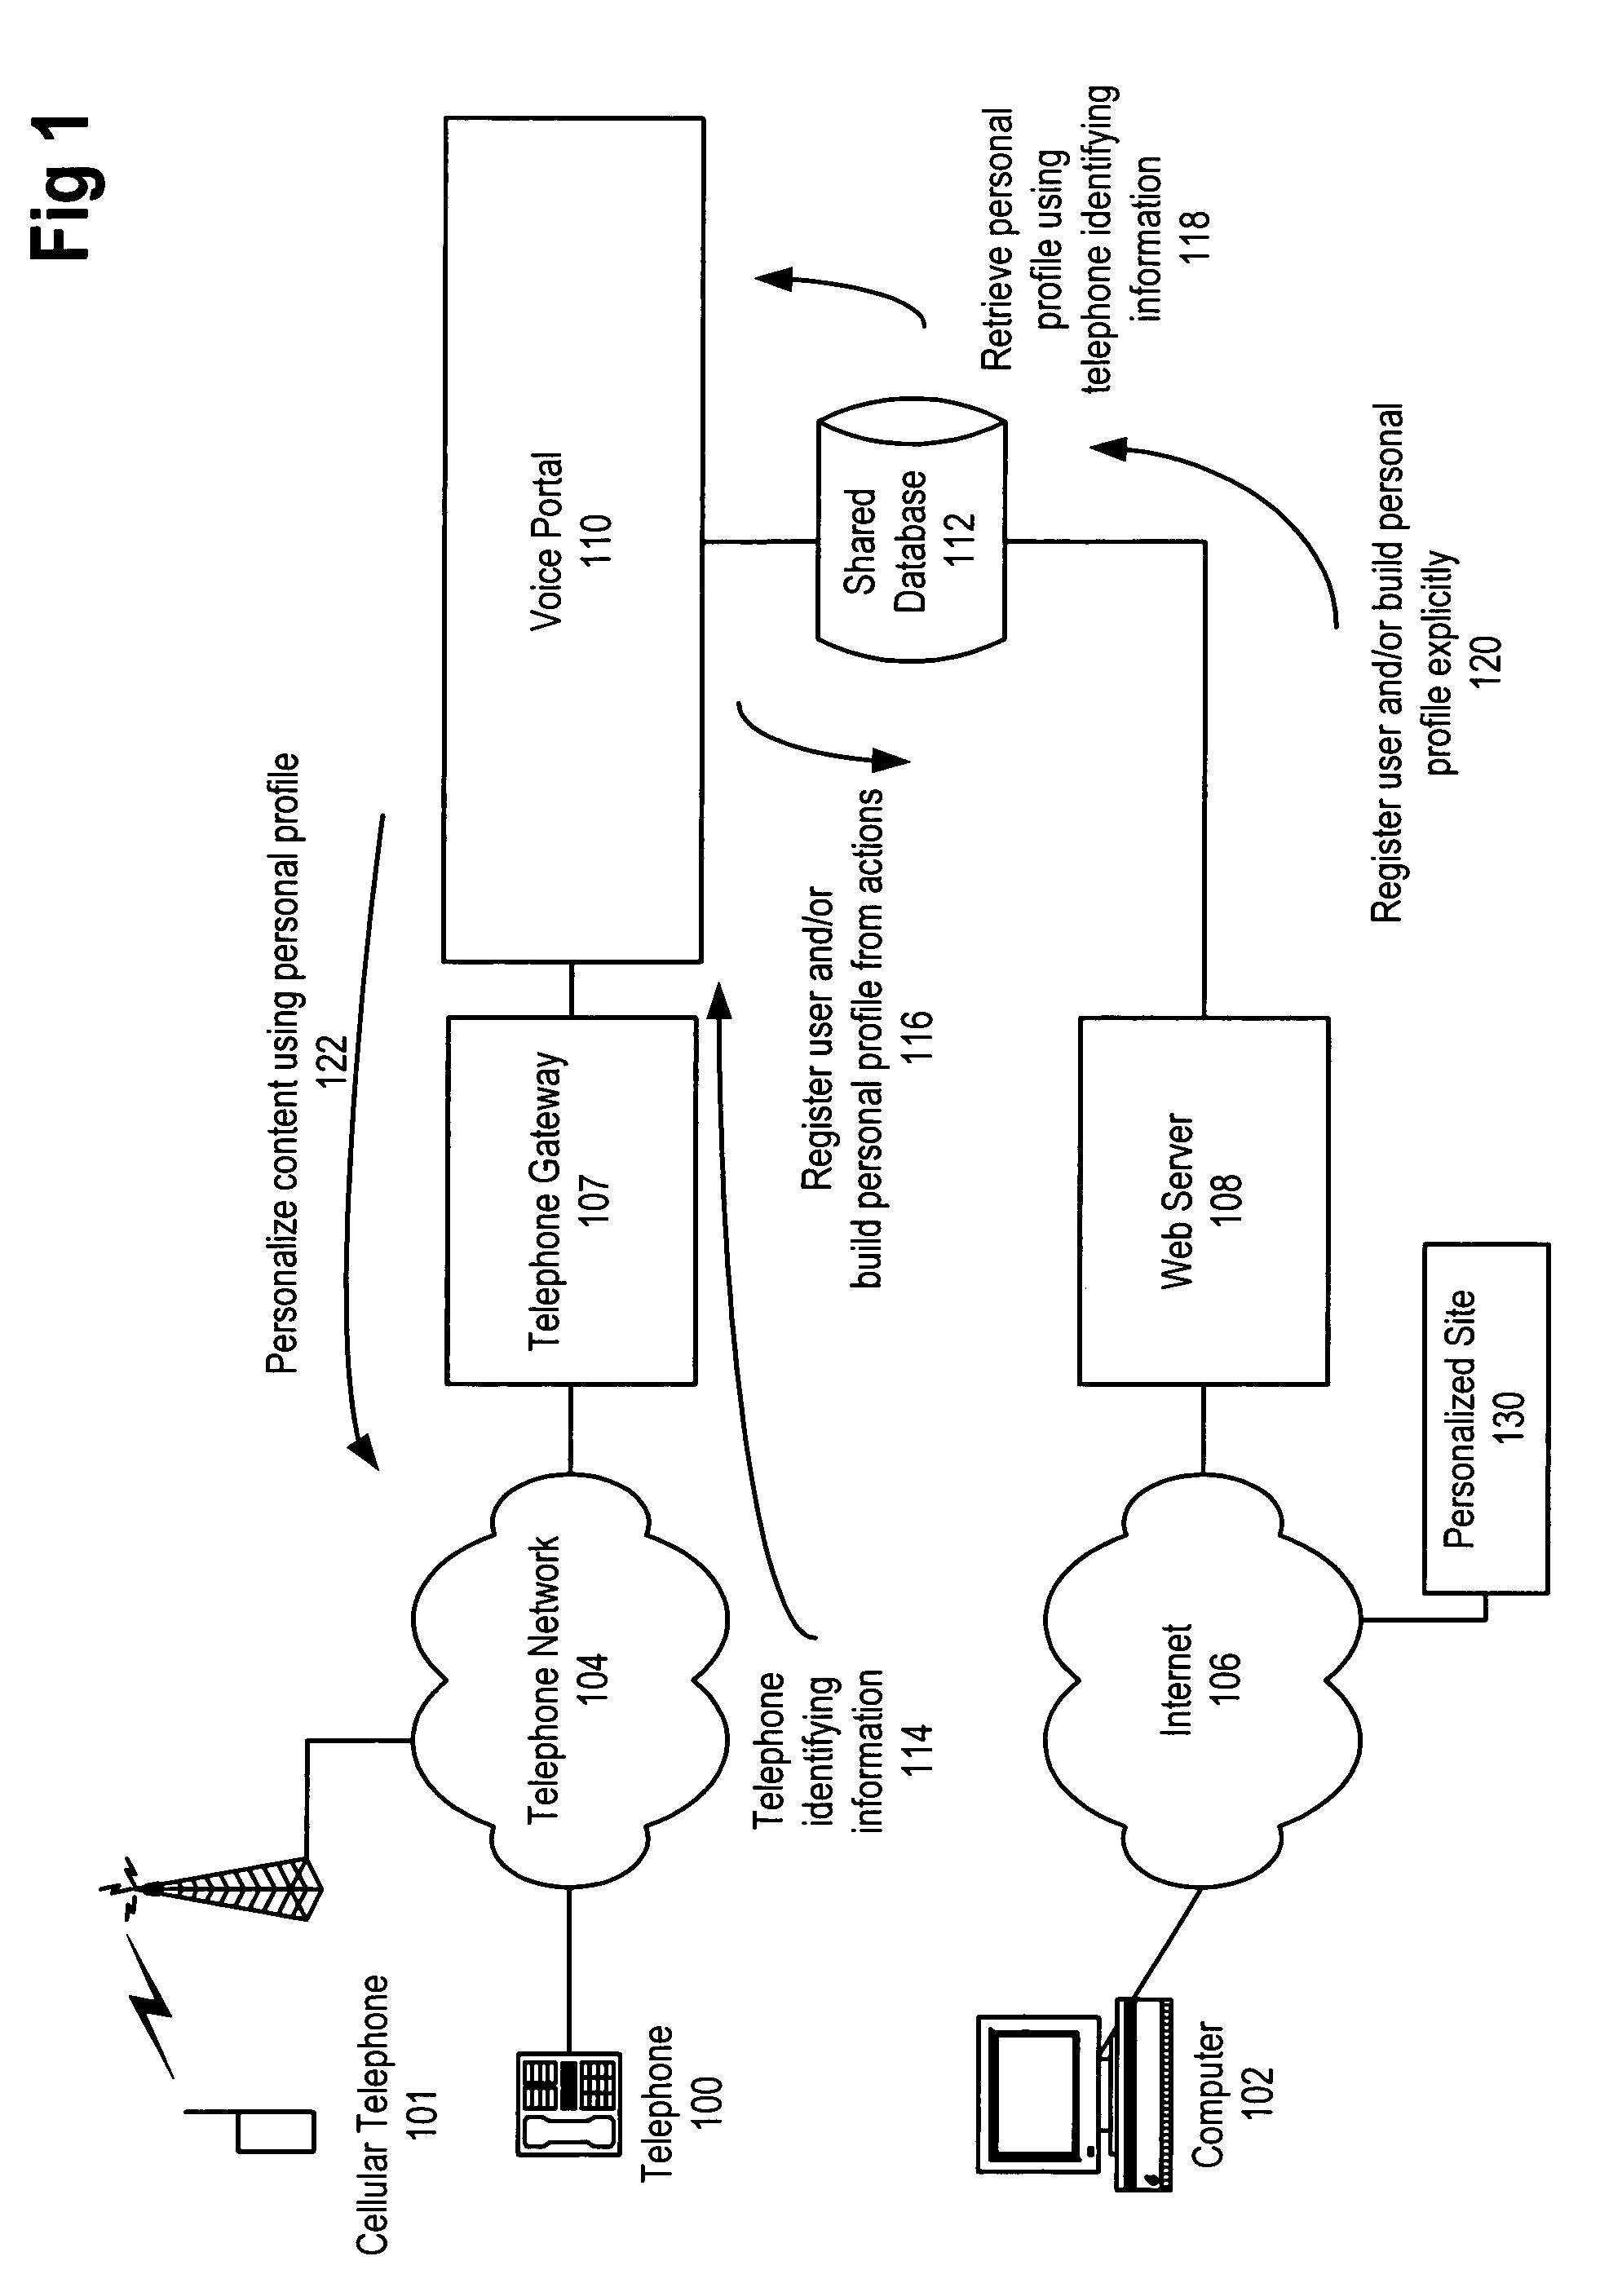 Voice and telephone keypad based data entry for interacting with voice information services